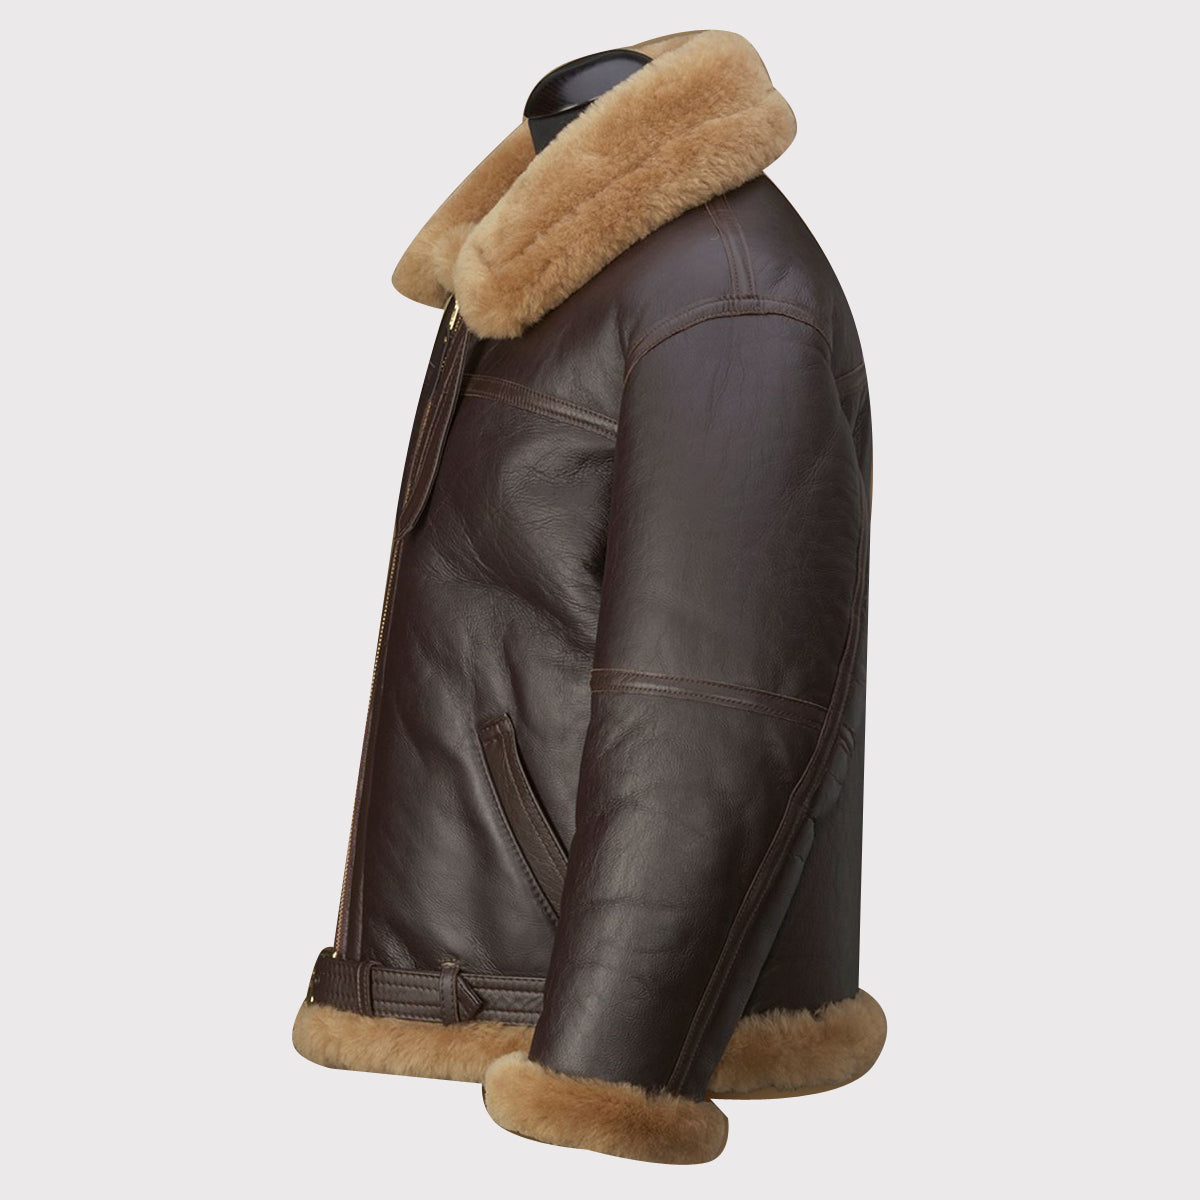 Men's RAF Brown Shearling Jacket - Classic Aviator Style!